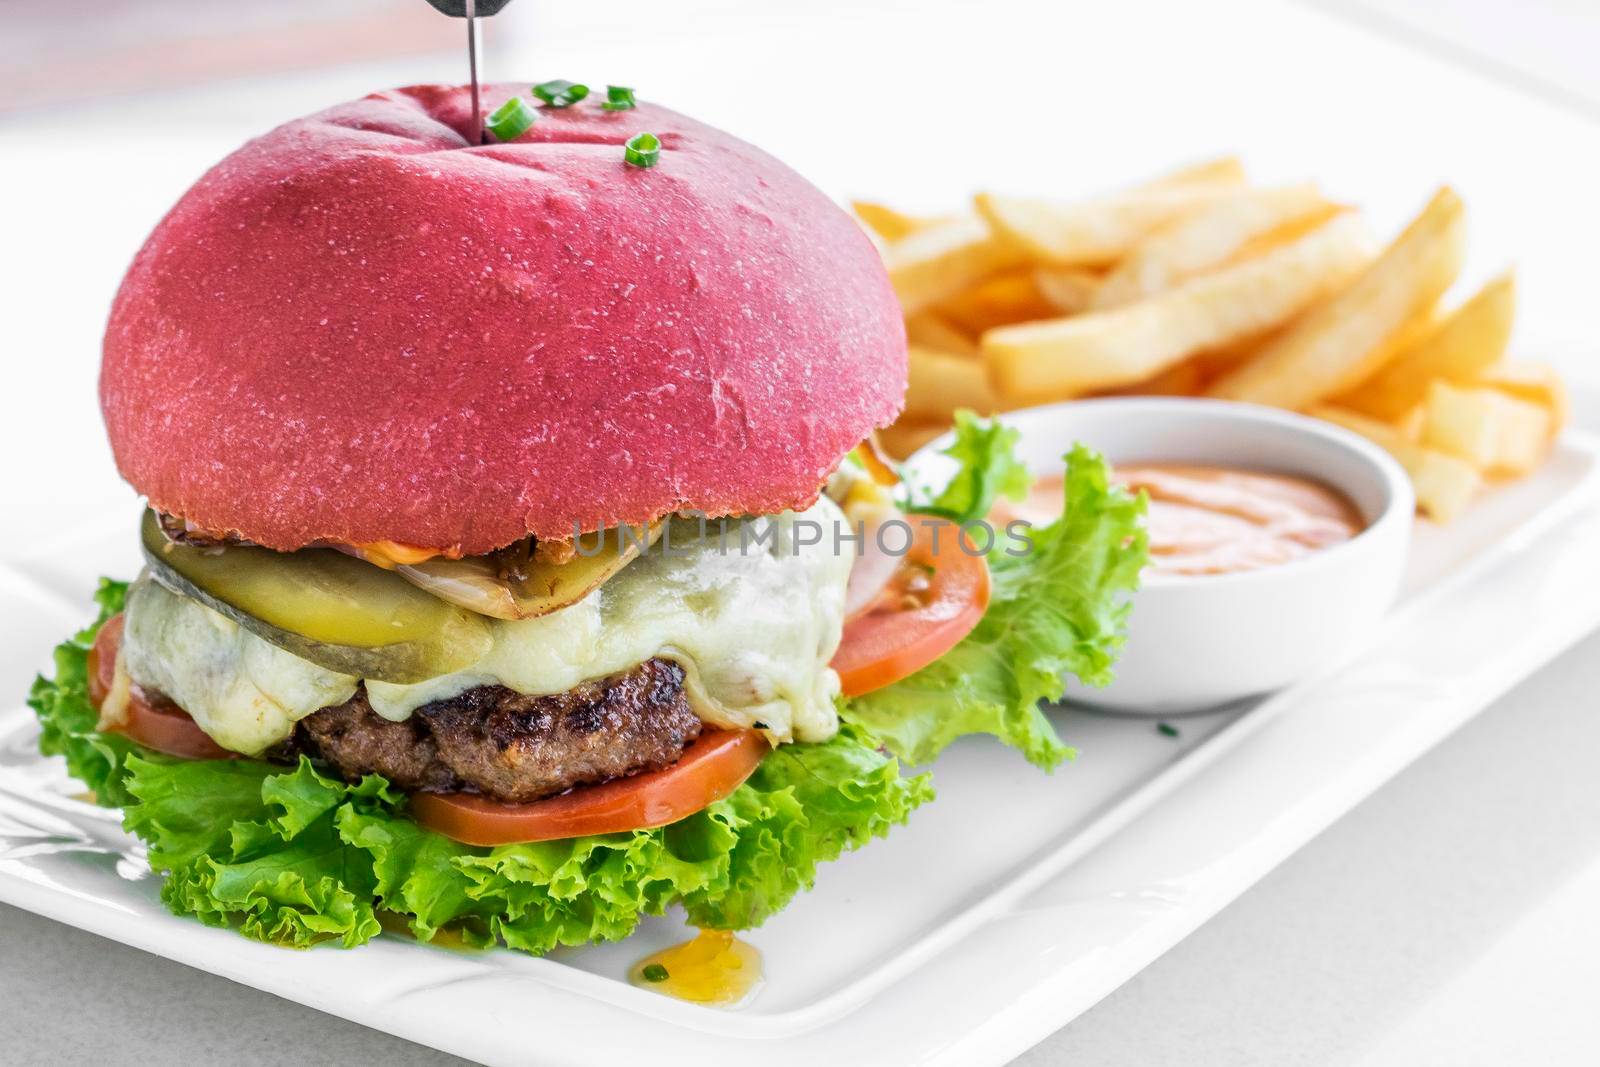 beetroot red bun cheese burger snack set with fries and chilli mayo on white plate